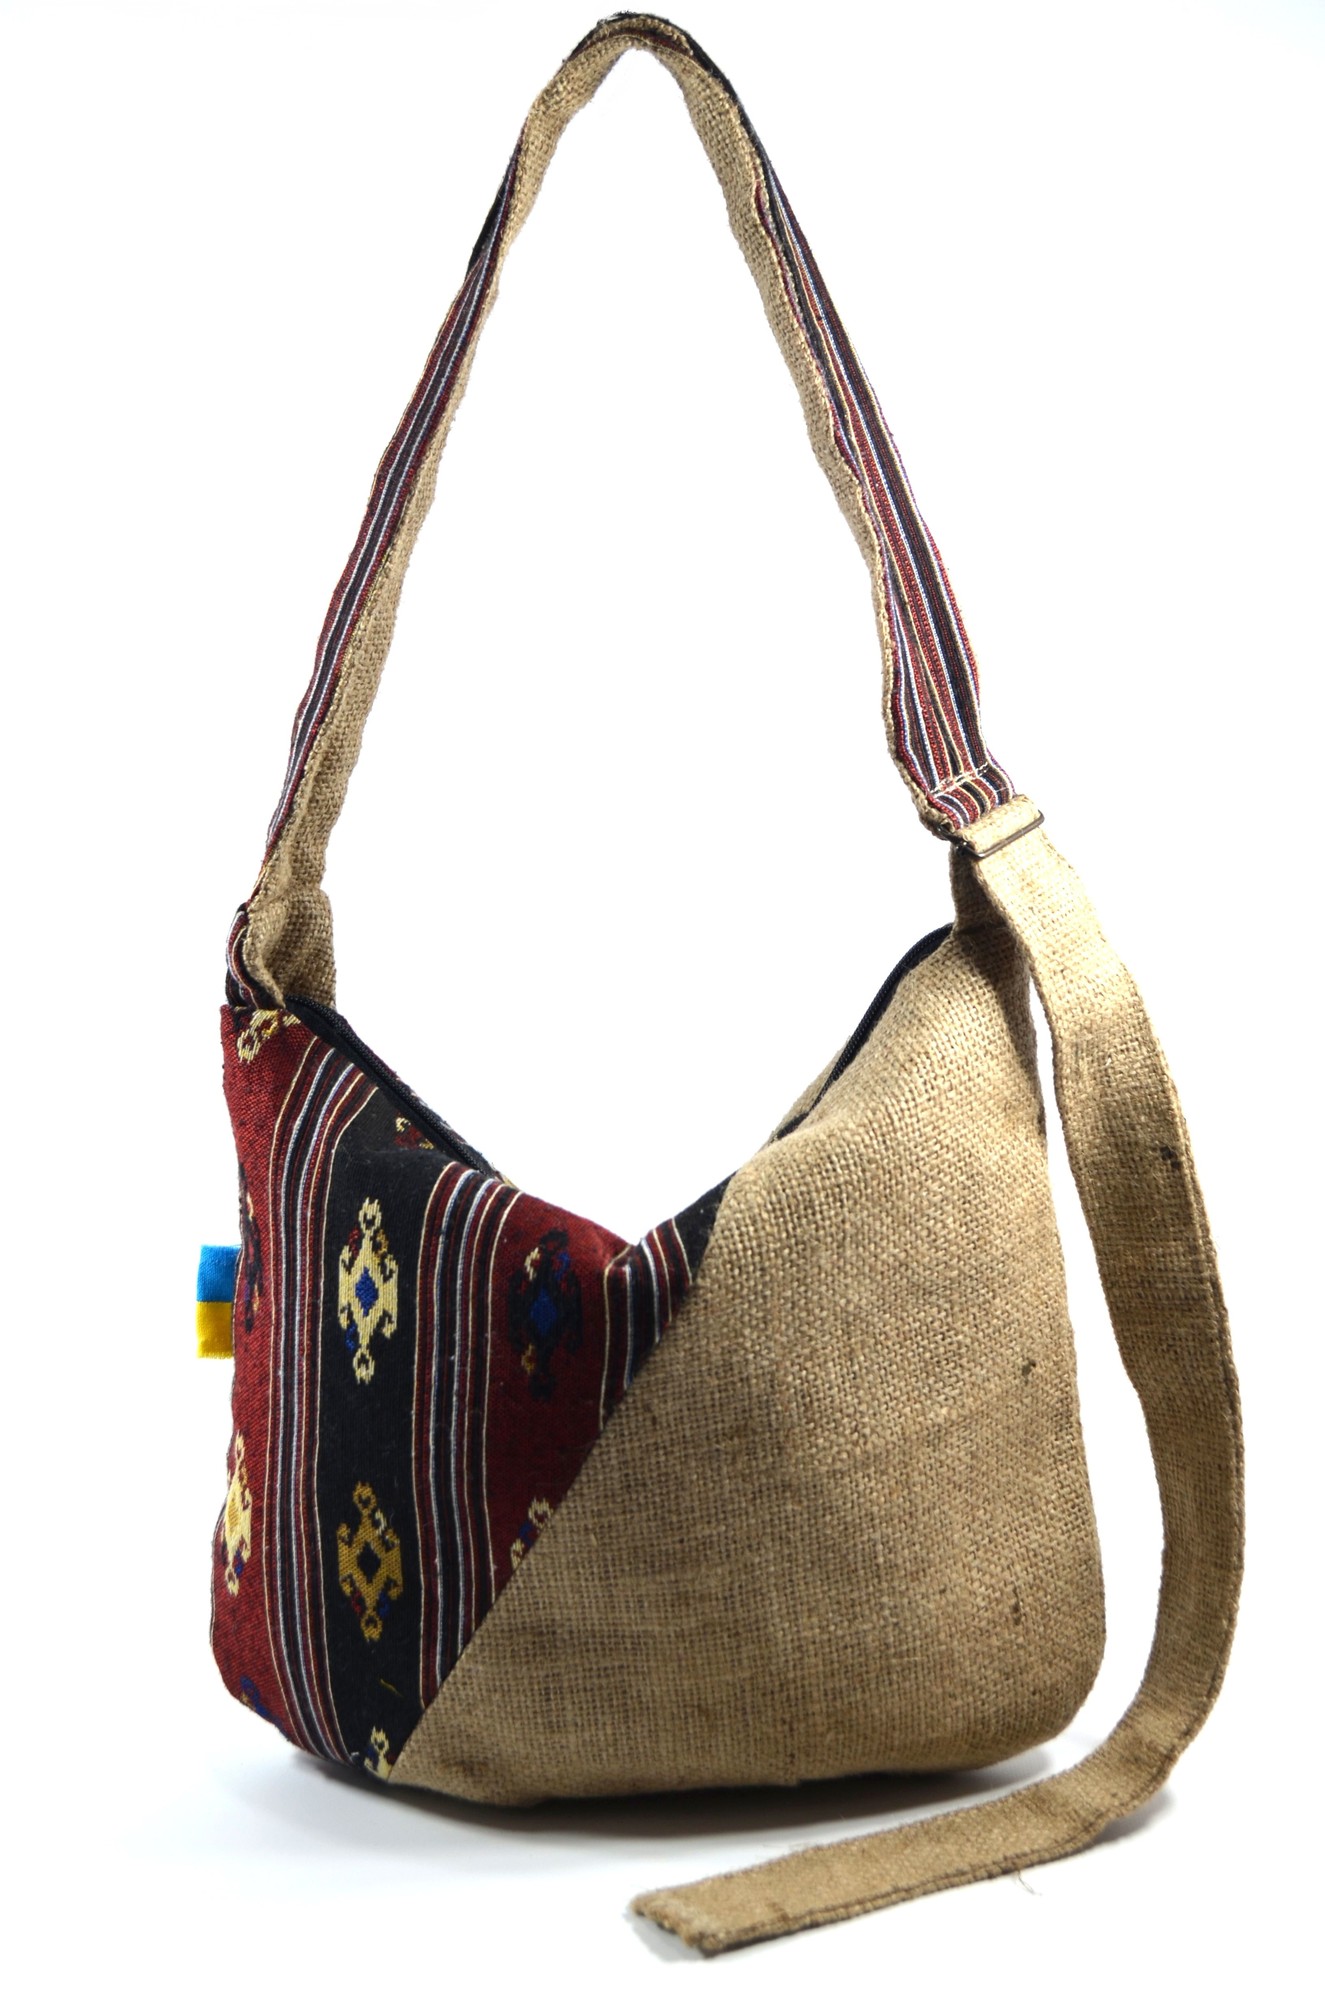 Women's Bag made of Natural Textile "LIRA" Handmade in Ethno style.